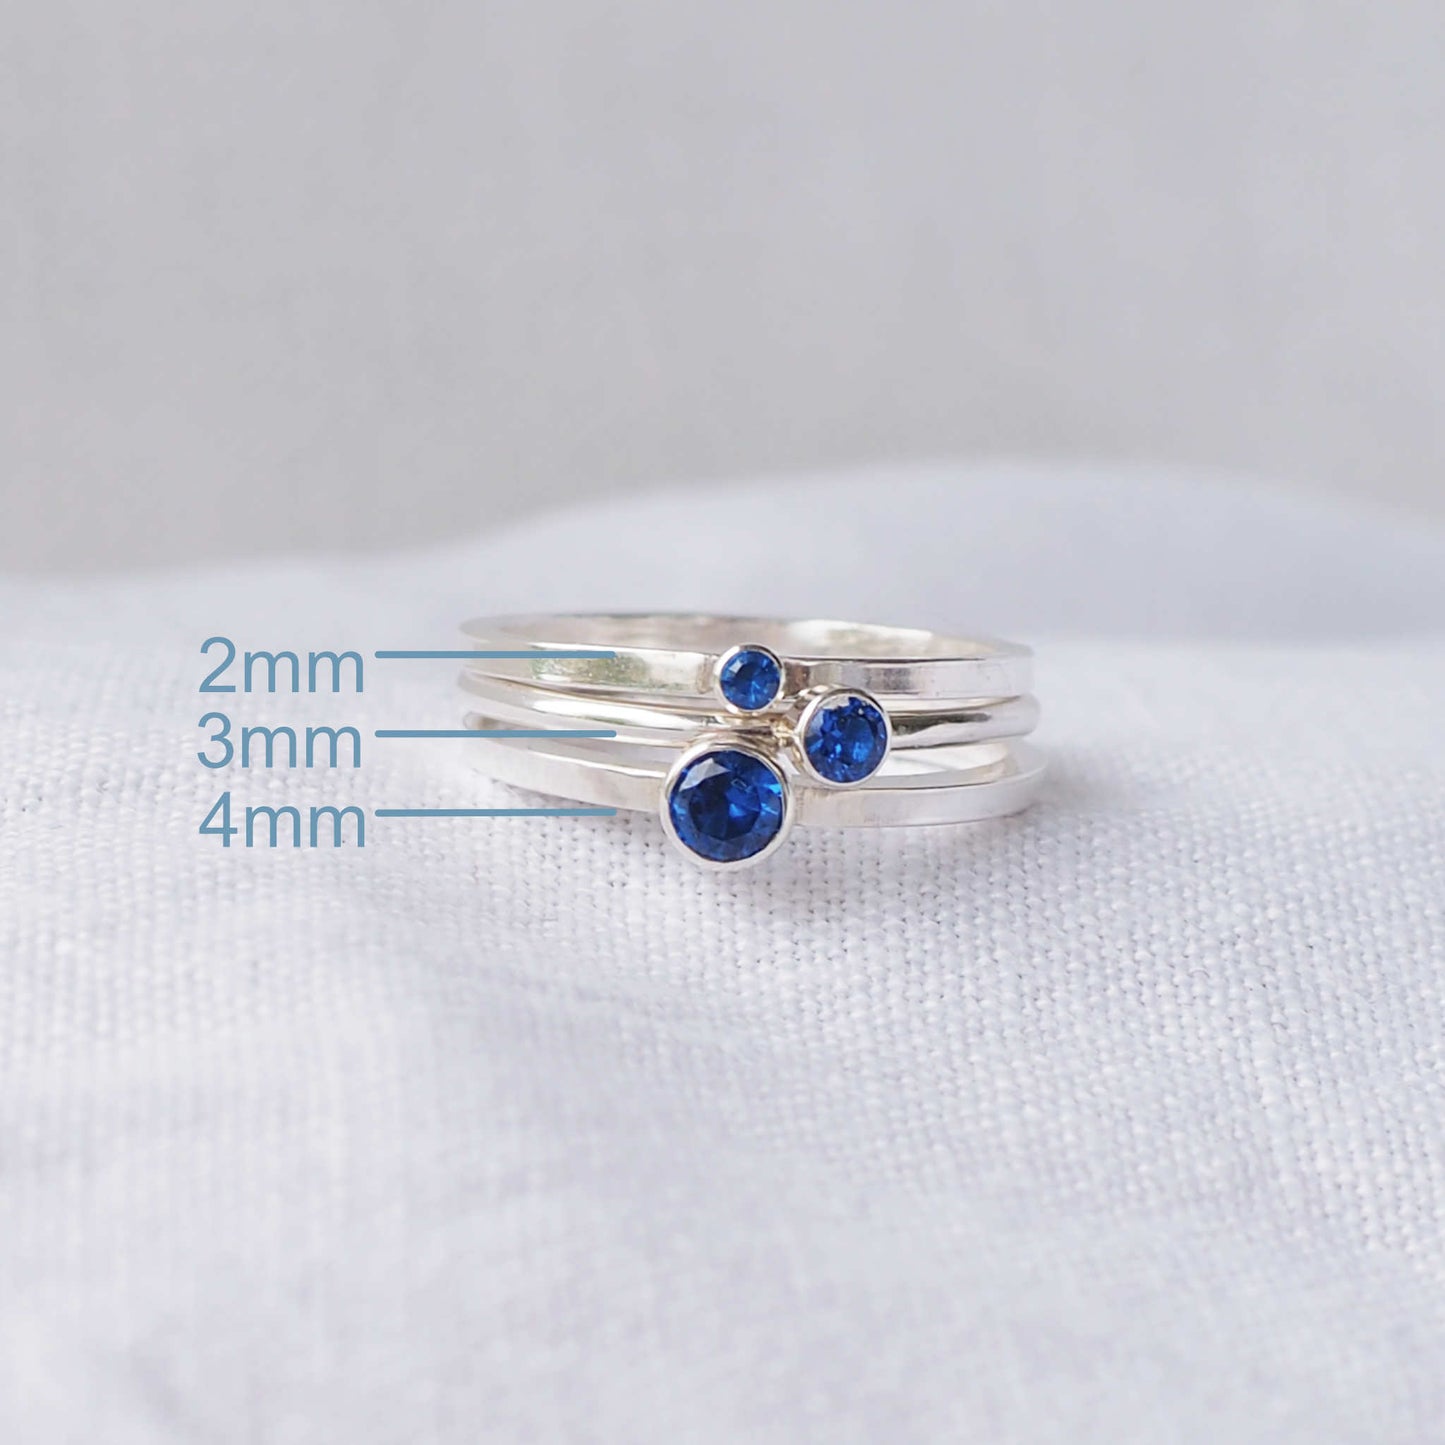 Three rings showing the square and round band styles with three different sized Cubic Zirconia in a Blue Sapphire colour. The rings are made from Sterling Silver and a round blue cubic zirconia measuring 2,3 or 4mm in size. Handmade by maram jewellery in Scotland